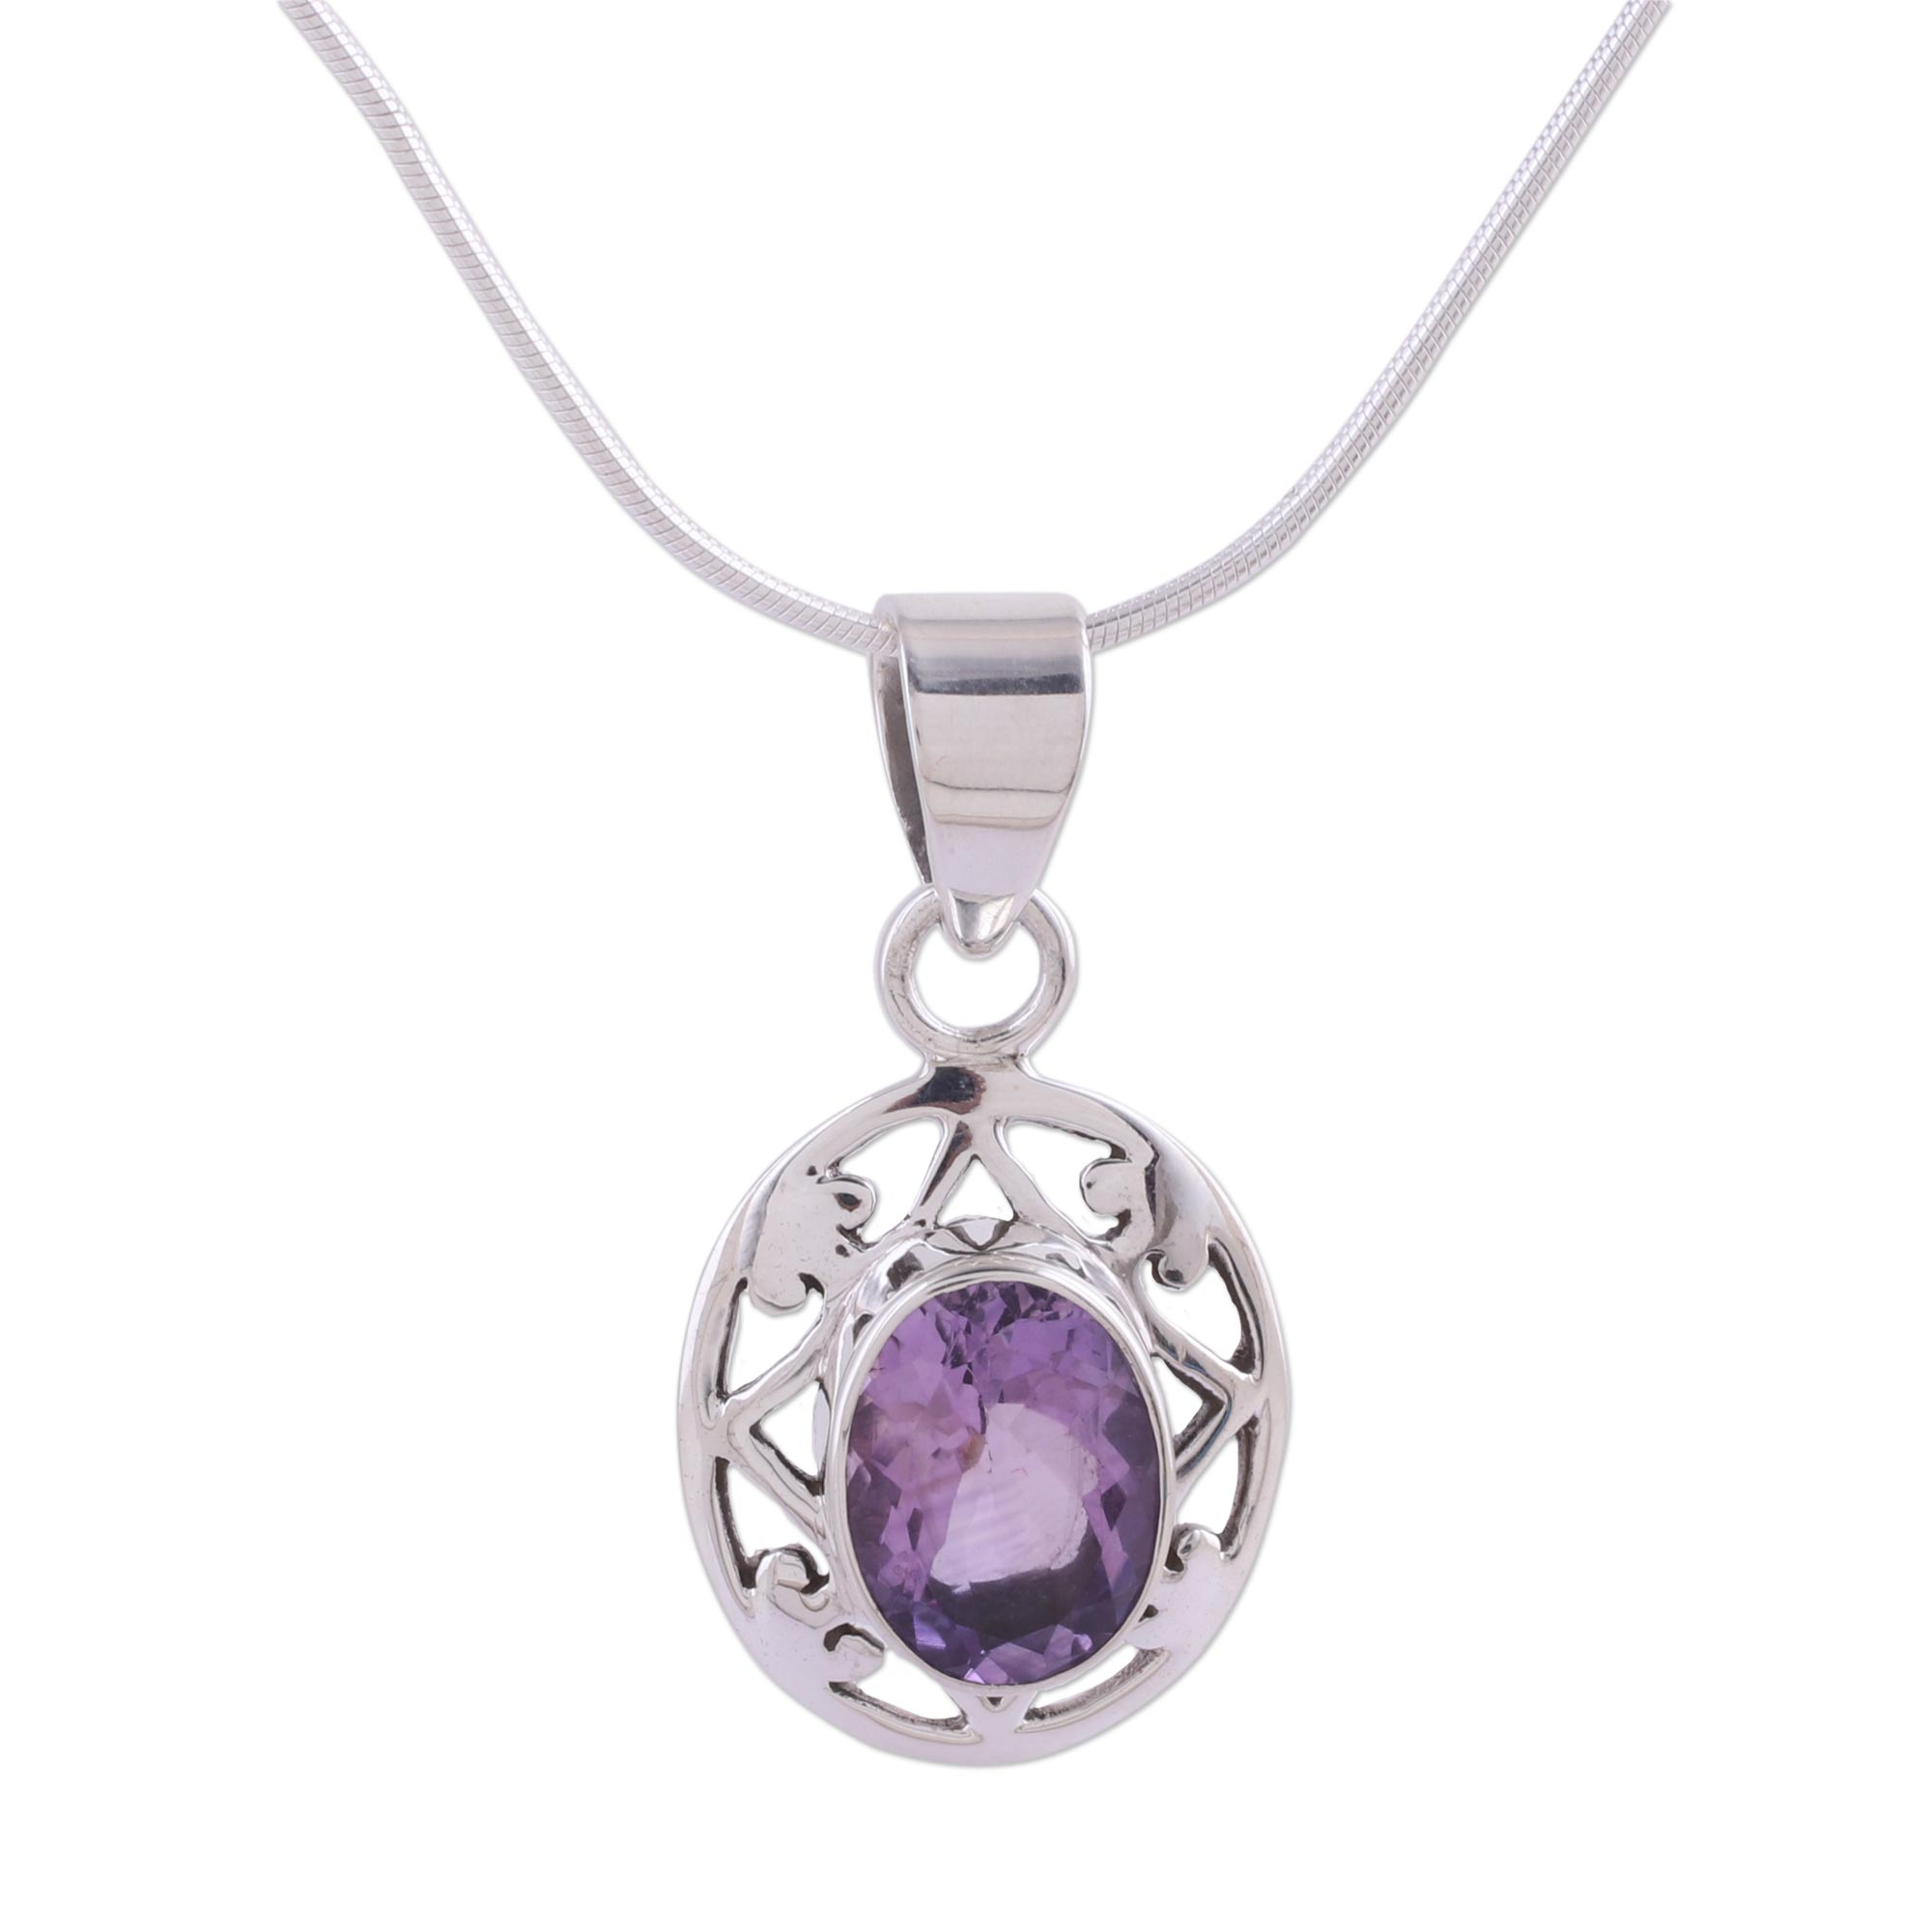 UNICEF Market | Hand Made Sterling Silver and Amethyst Necklace - Lilac Dew